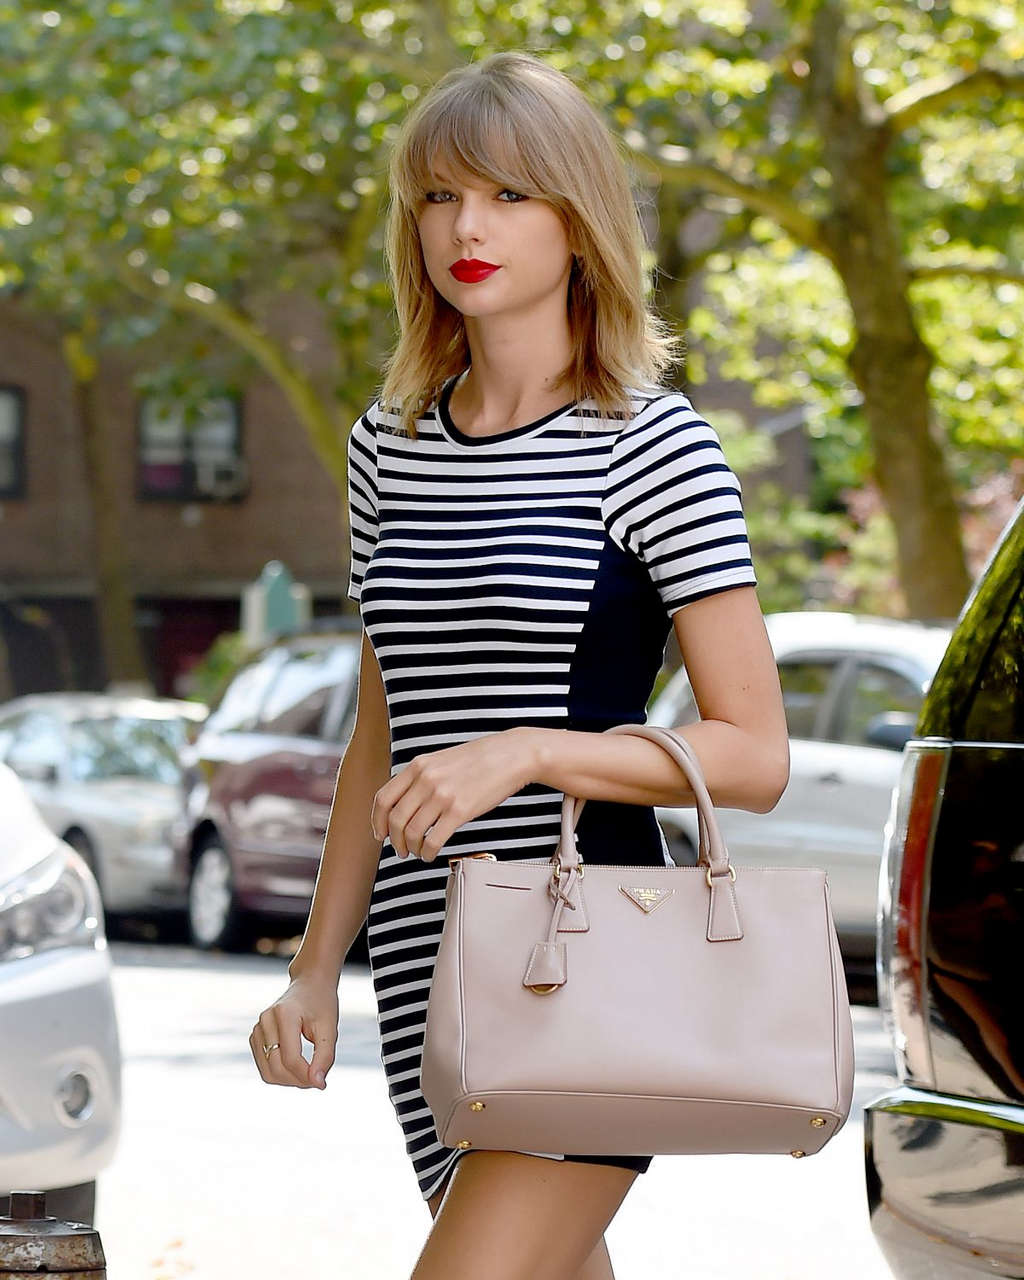 Taylor Swift Tight Dress Out New York